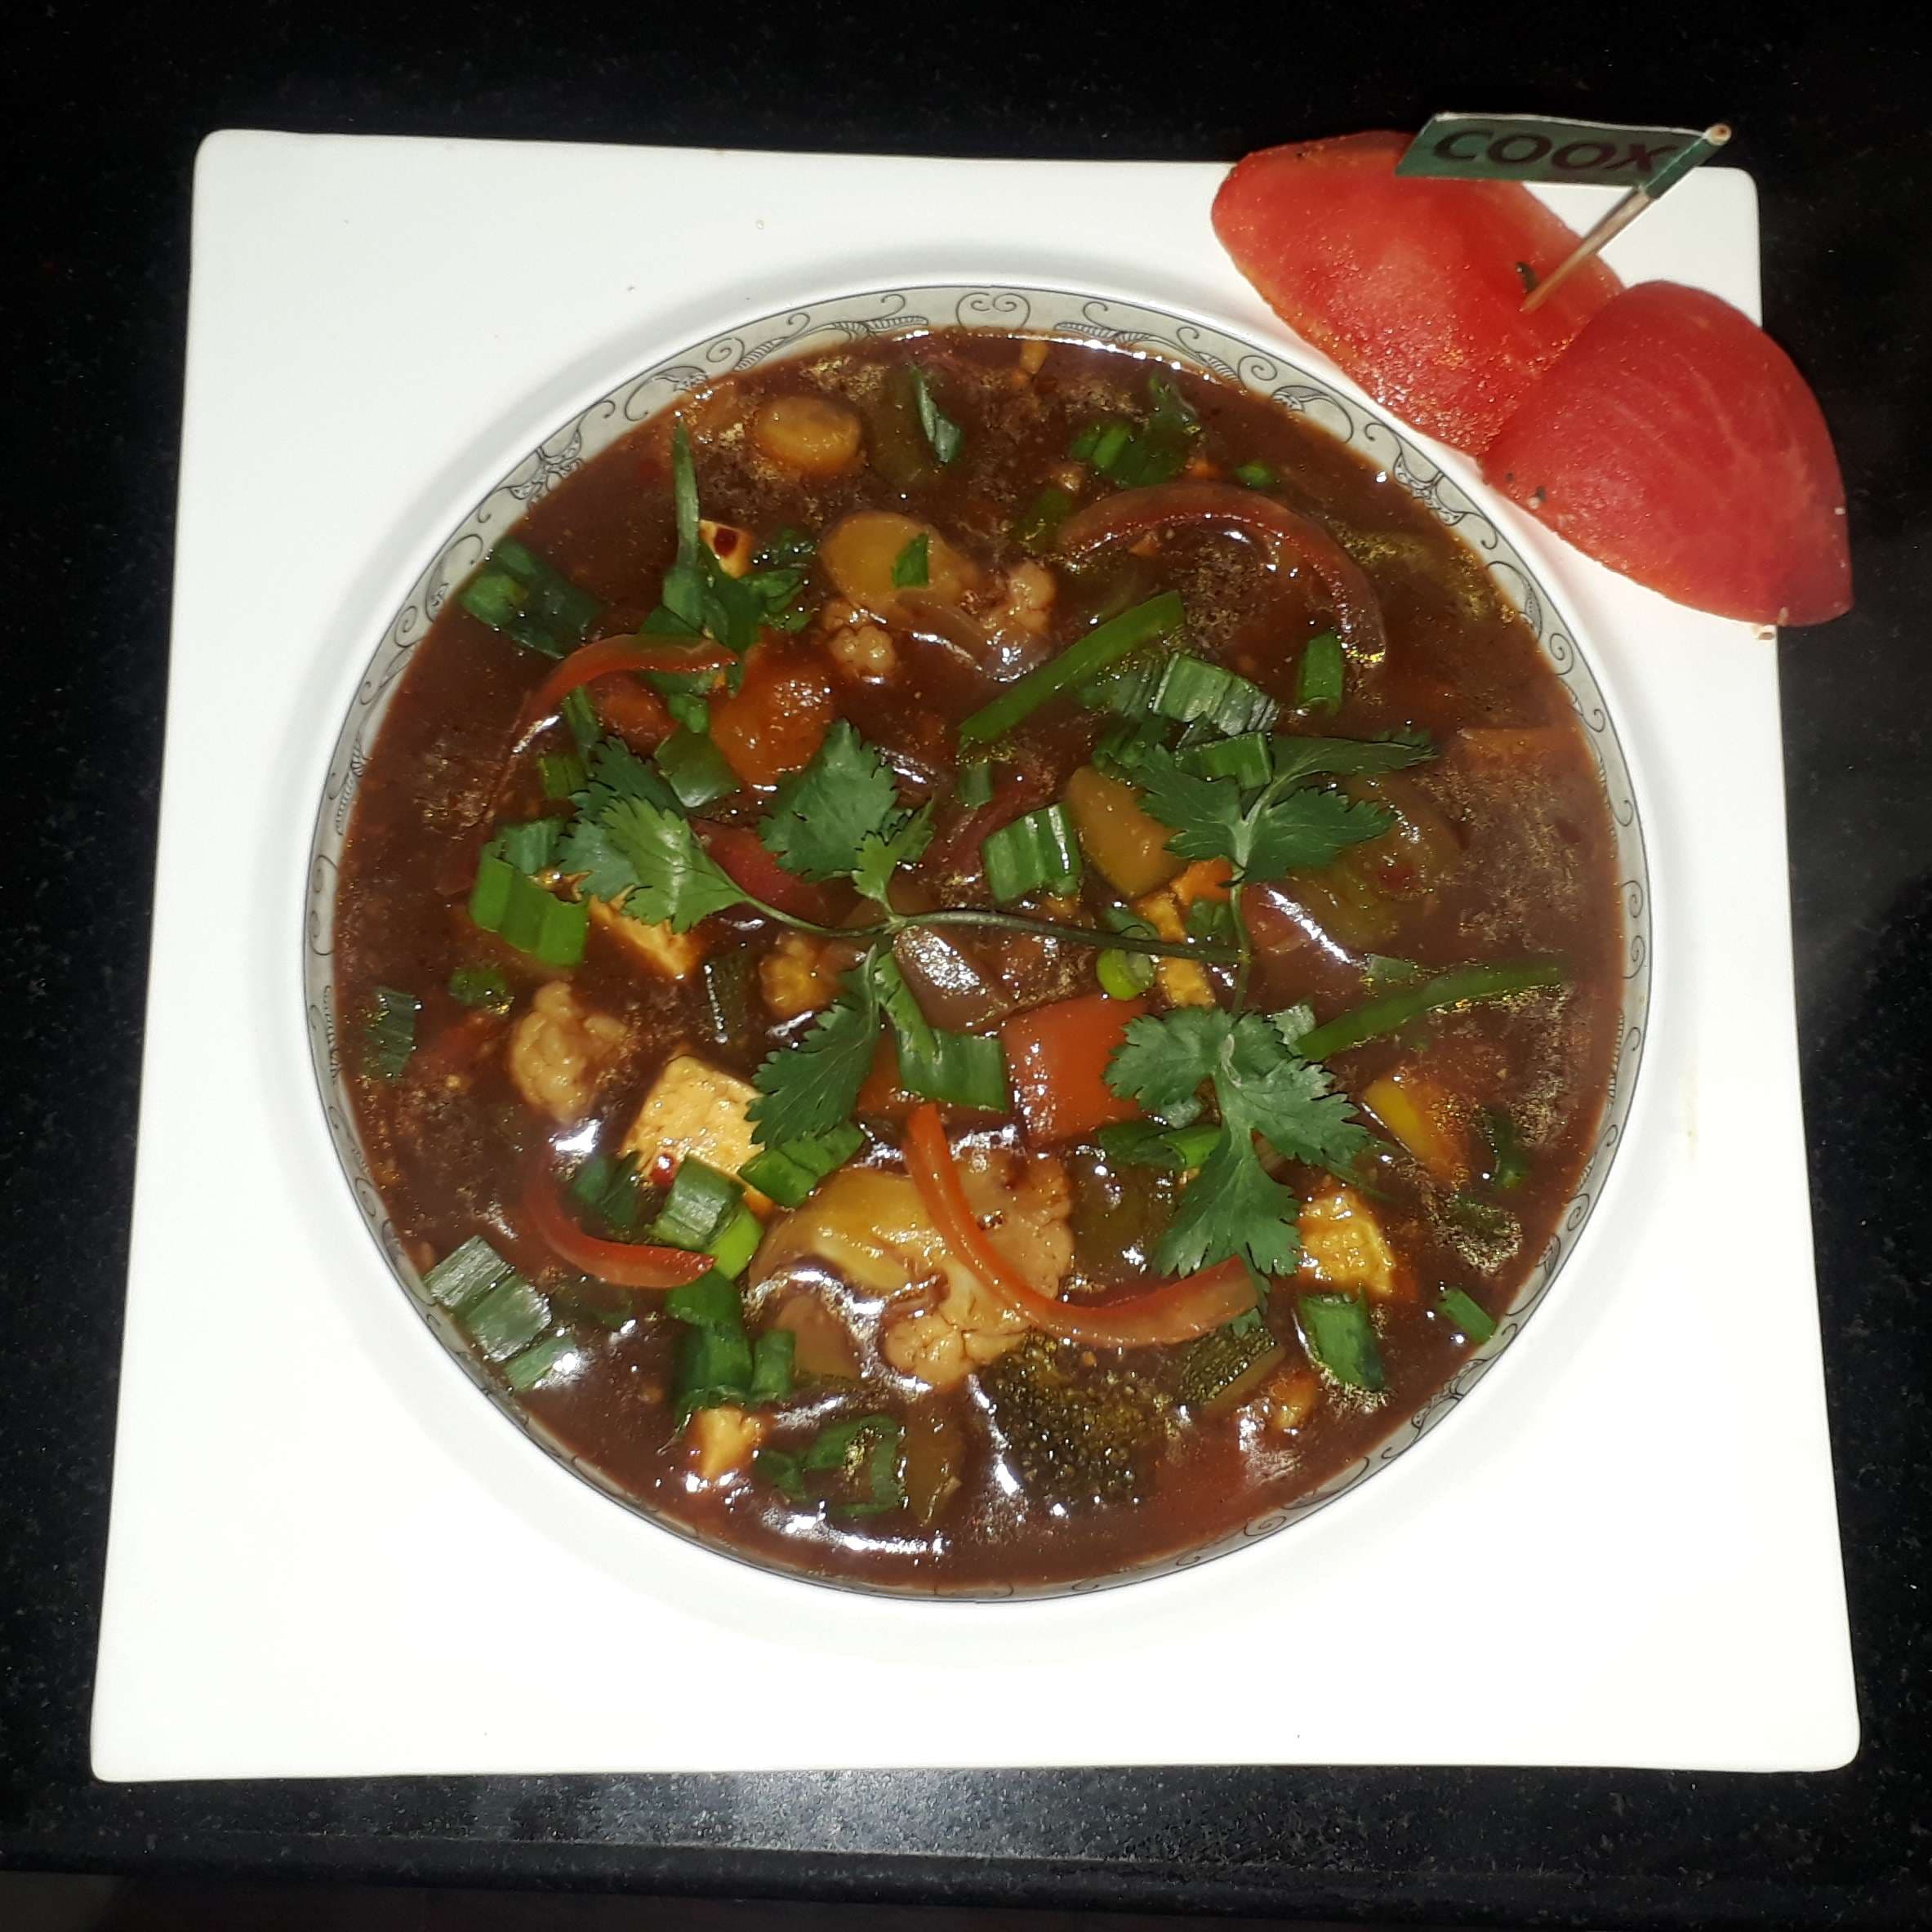 Tasty Mix Veg in Hot Garlic Sauce cooked by COOX chefs cooks during occasions parties events at home